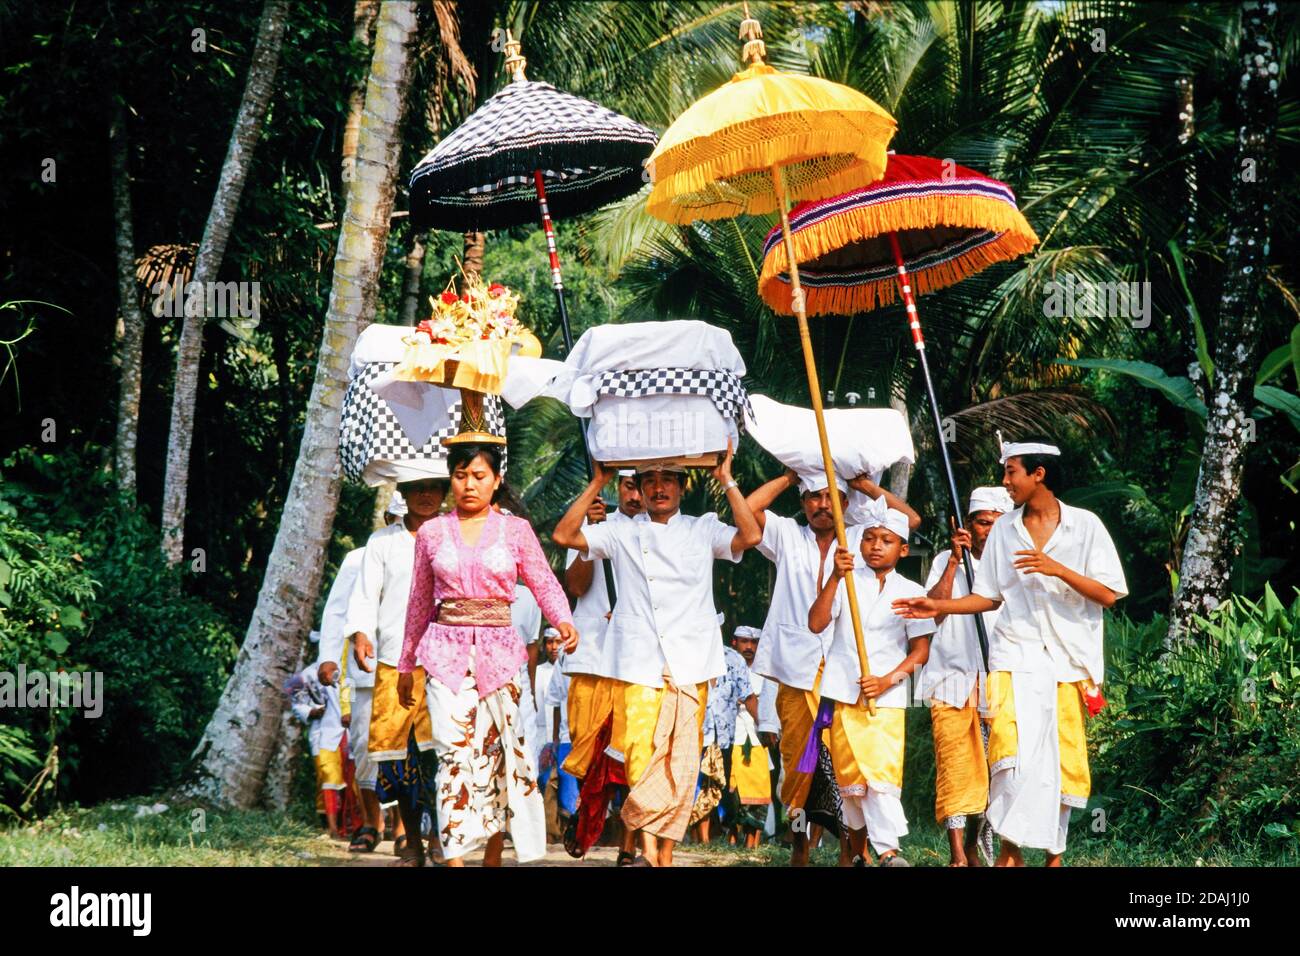 Traditional Balinese procession. People dressed in sarongs carry offerings on their heads under large traditional umbrellas during a celebration in Ubud, Indonesia Stock Photo